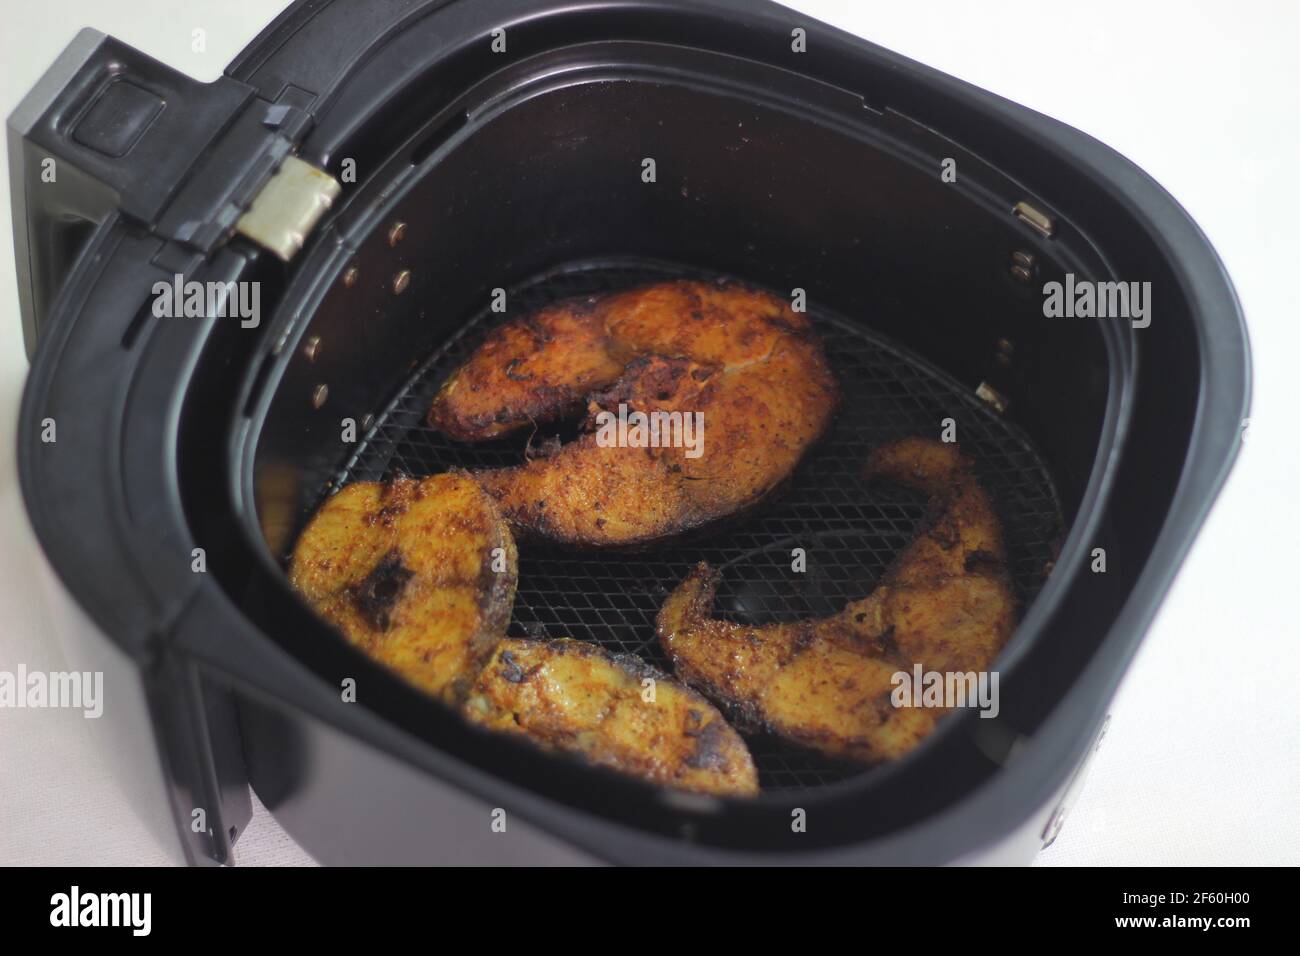 Cobia fish inside the air fryer. In India it is called Moda fish. Other common names include black kingfish, black salmon, ling, lemonfish, crabeater, Stock Photo